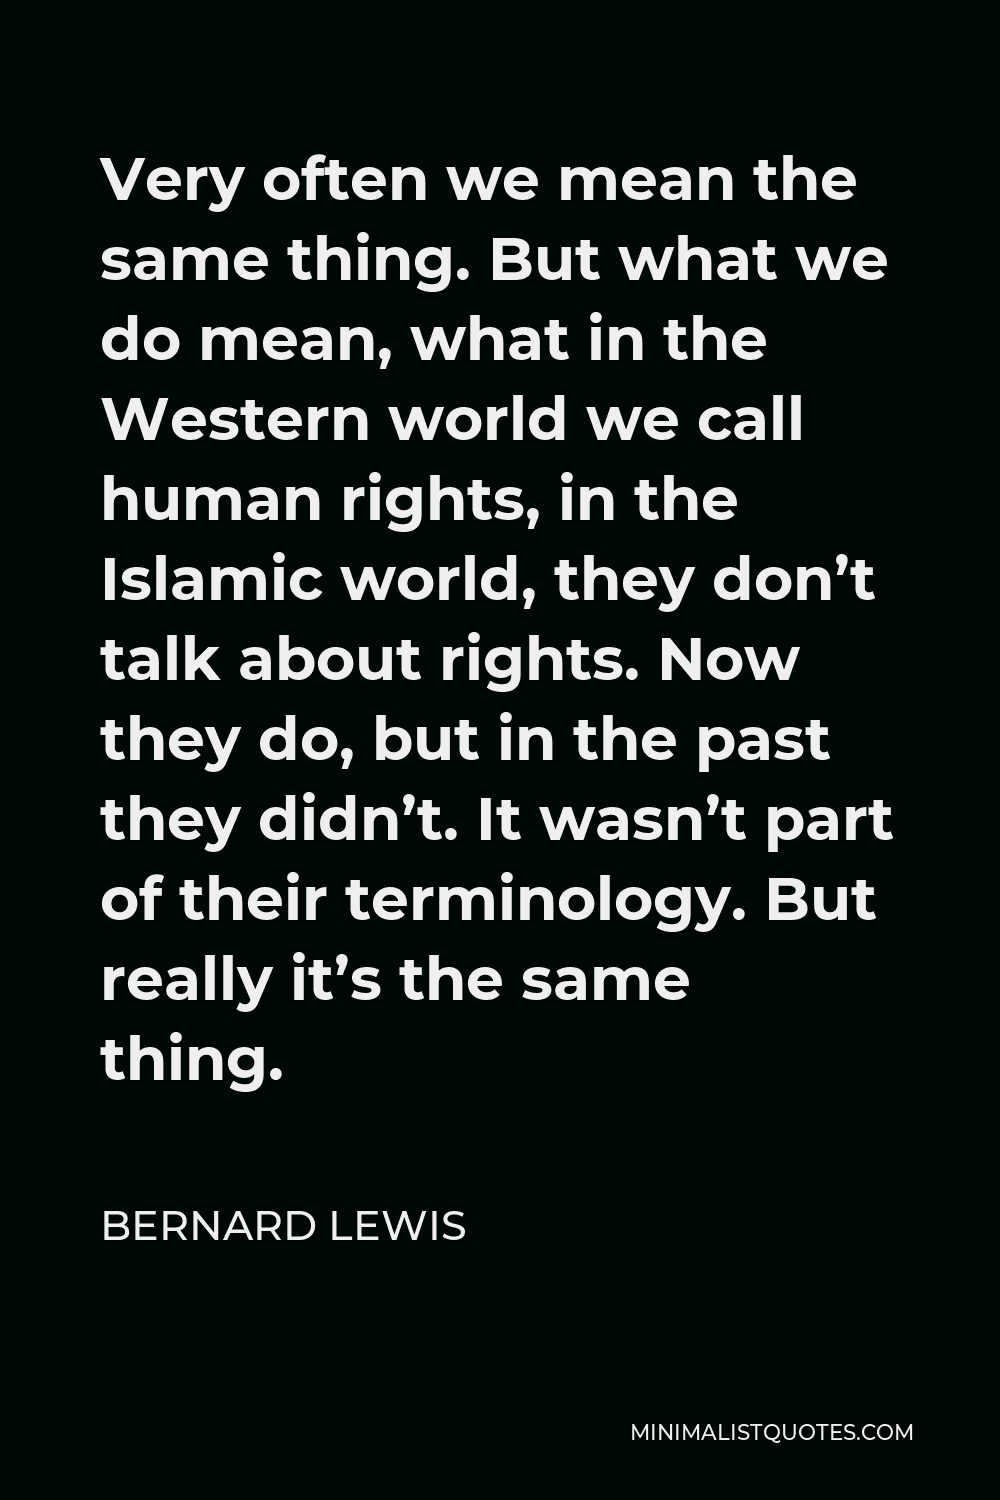 Bernard Lewis Quote - Very often we mean the same thing. But what we do mean, what in the Western world we call human rights, in the Islamic world, they don’t talk about rights. Now they do, but in the past they didn’t. It wasn’t part of their terminology. But really it’s the same thing.